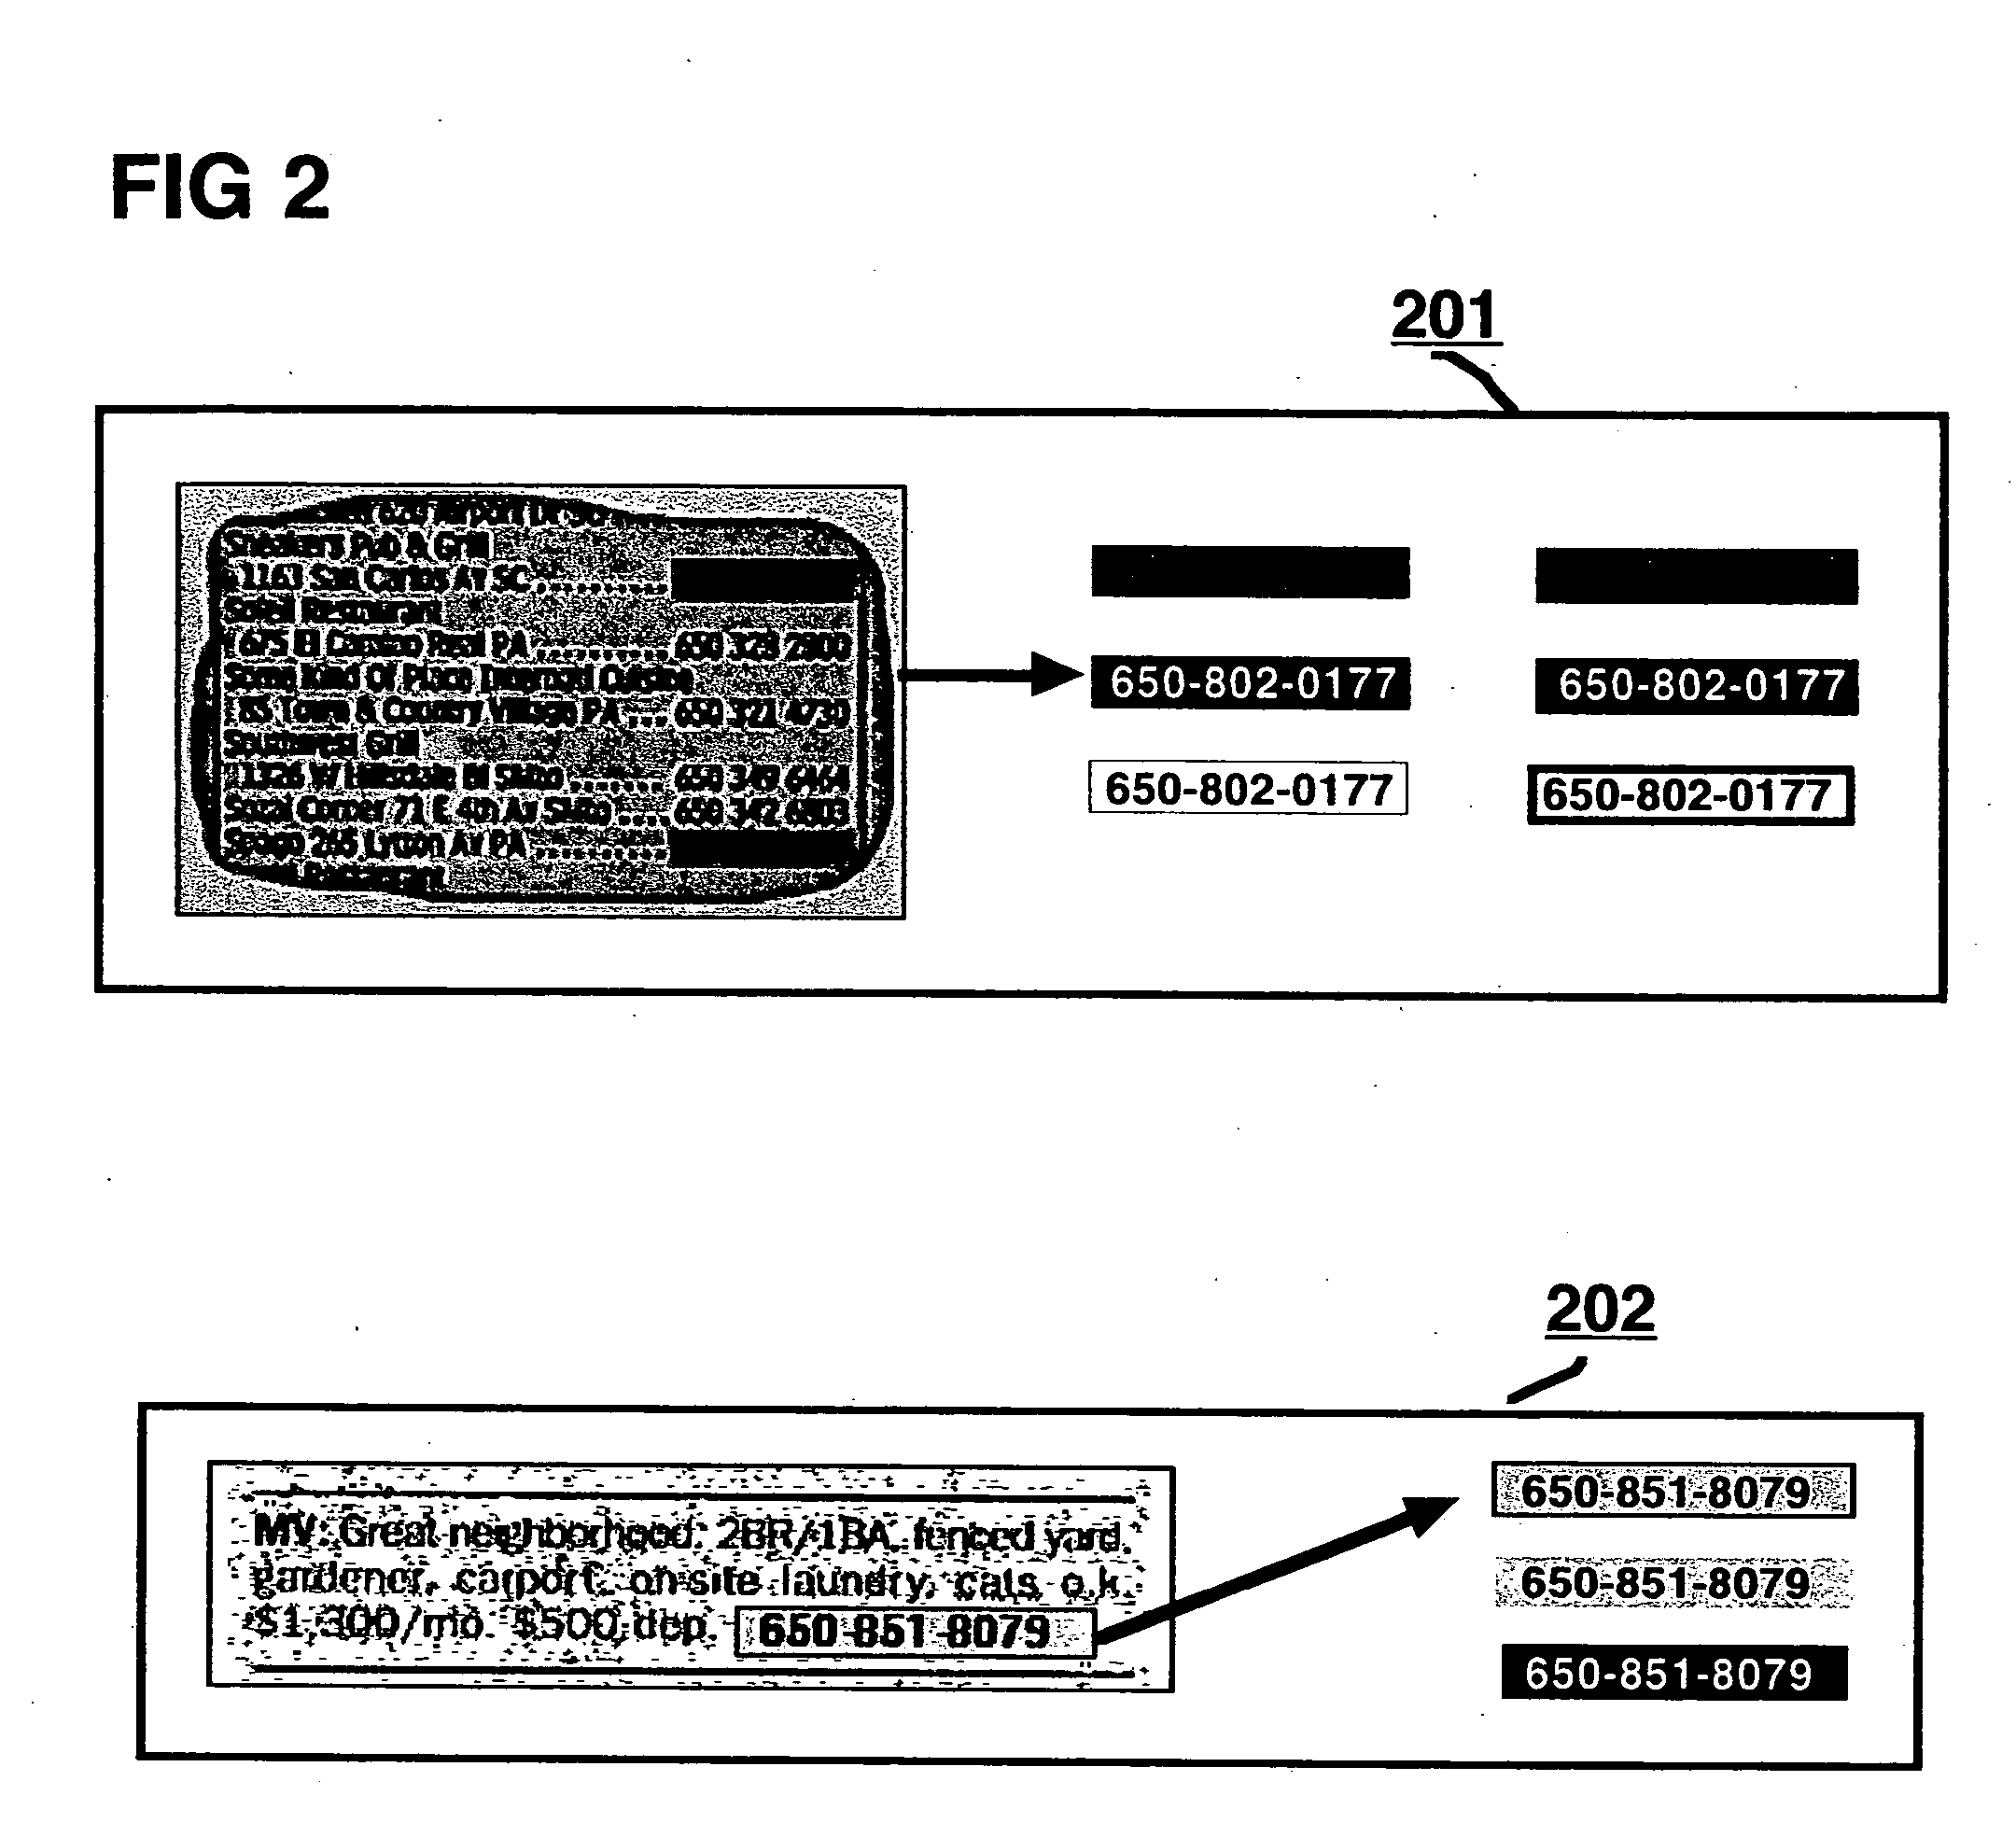 Linking method for printed telephone numbers identified by a non-indicia graphic delimiter